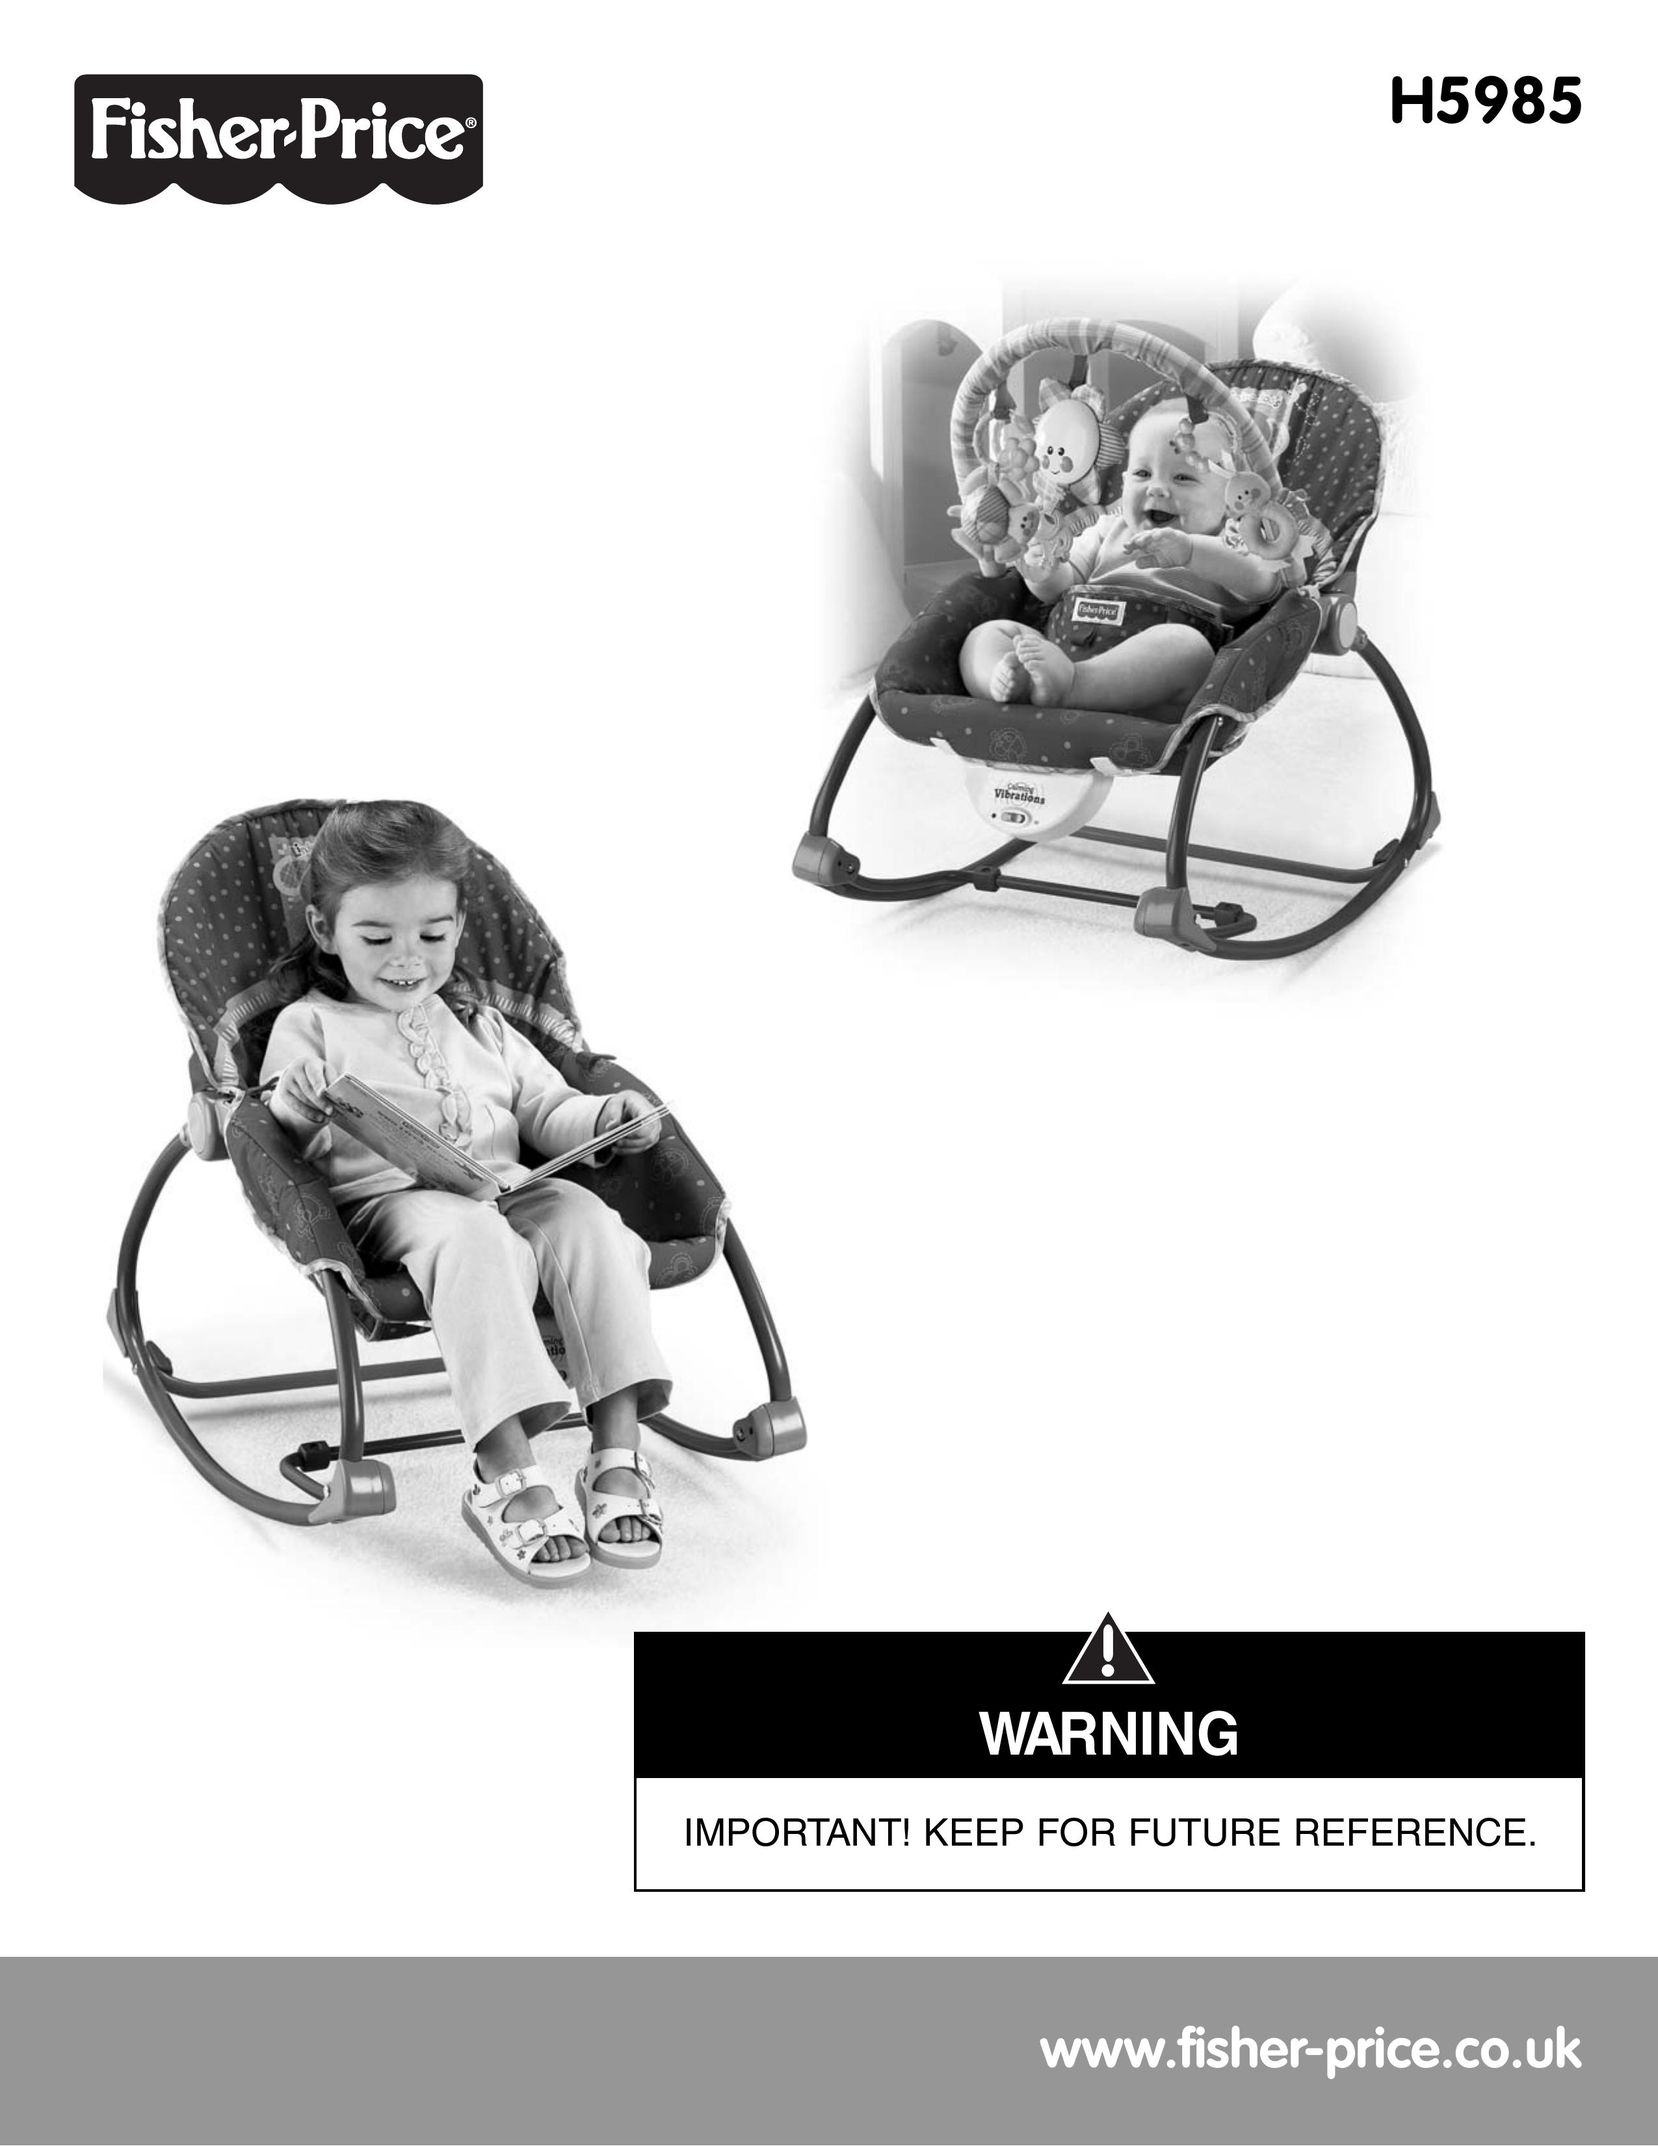 Fisher-Price H5985 Bouncy Seat User Manual